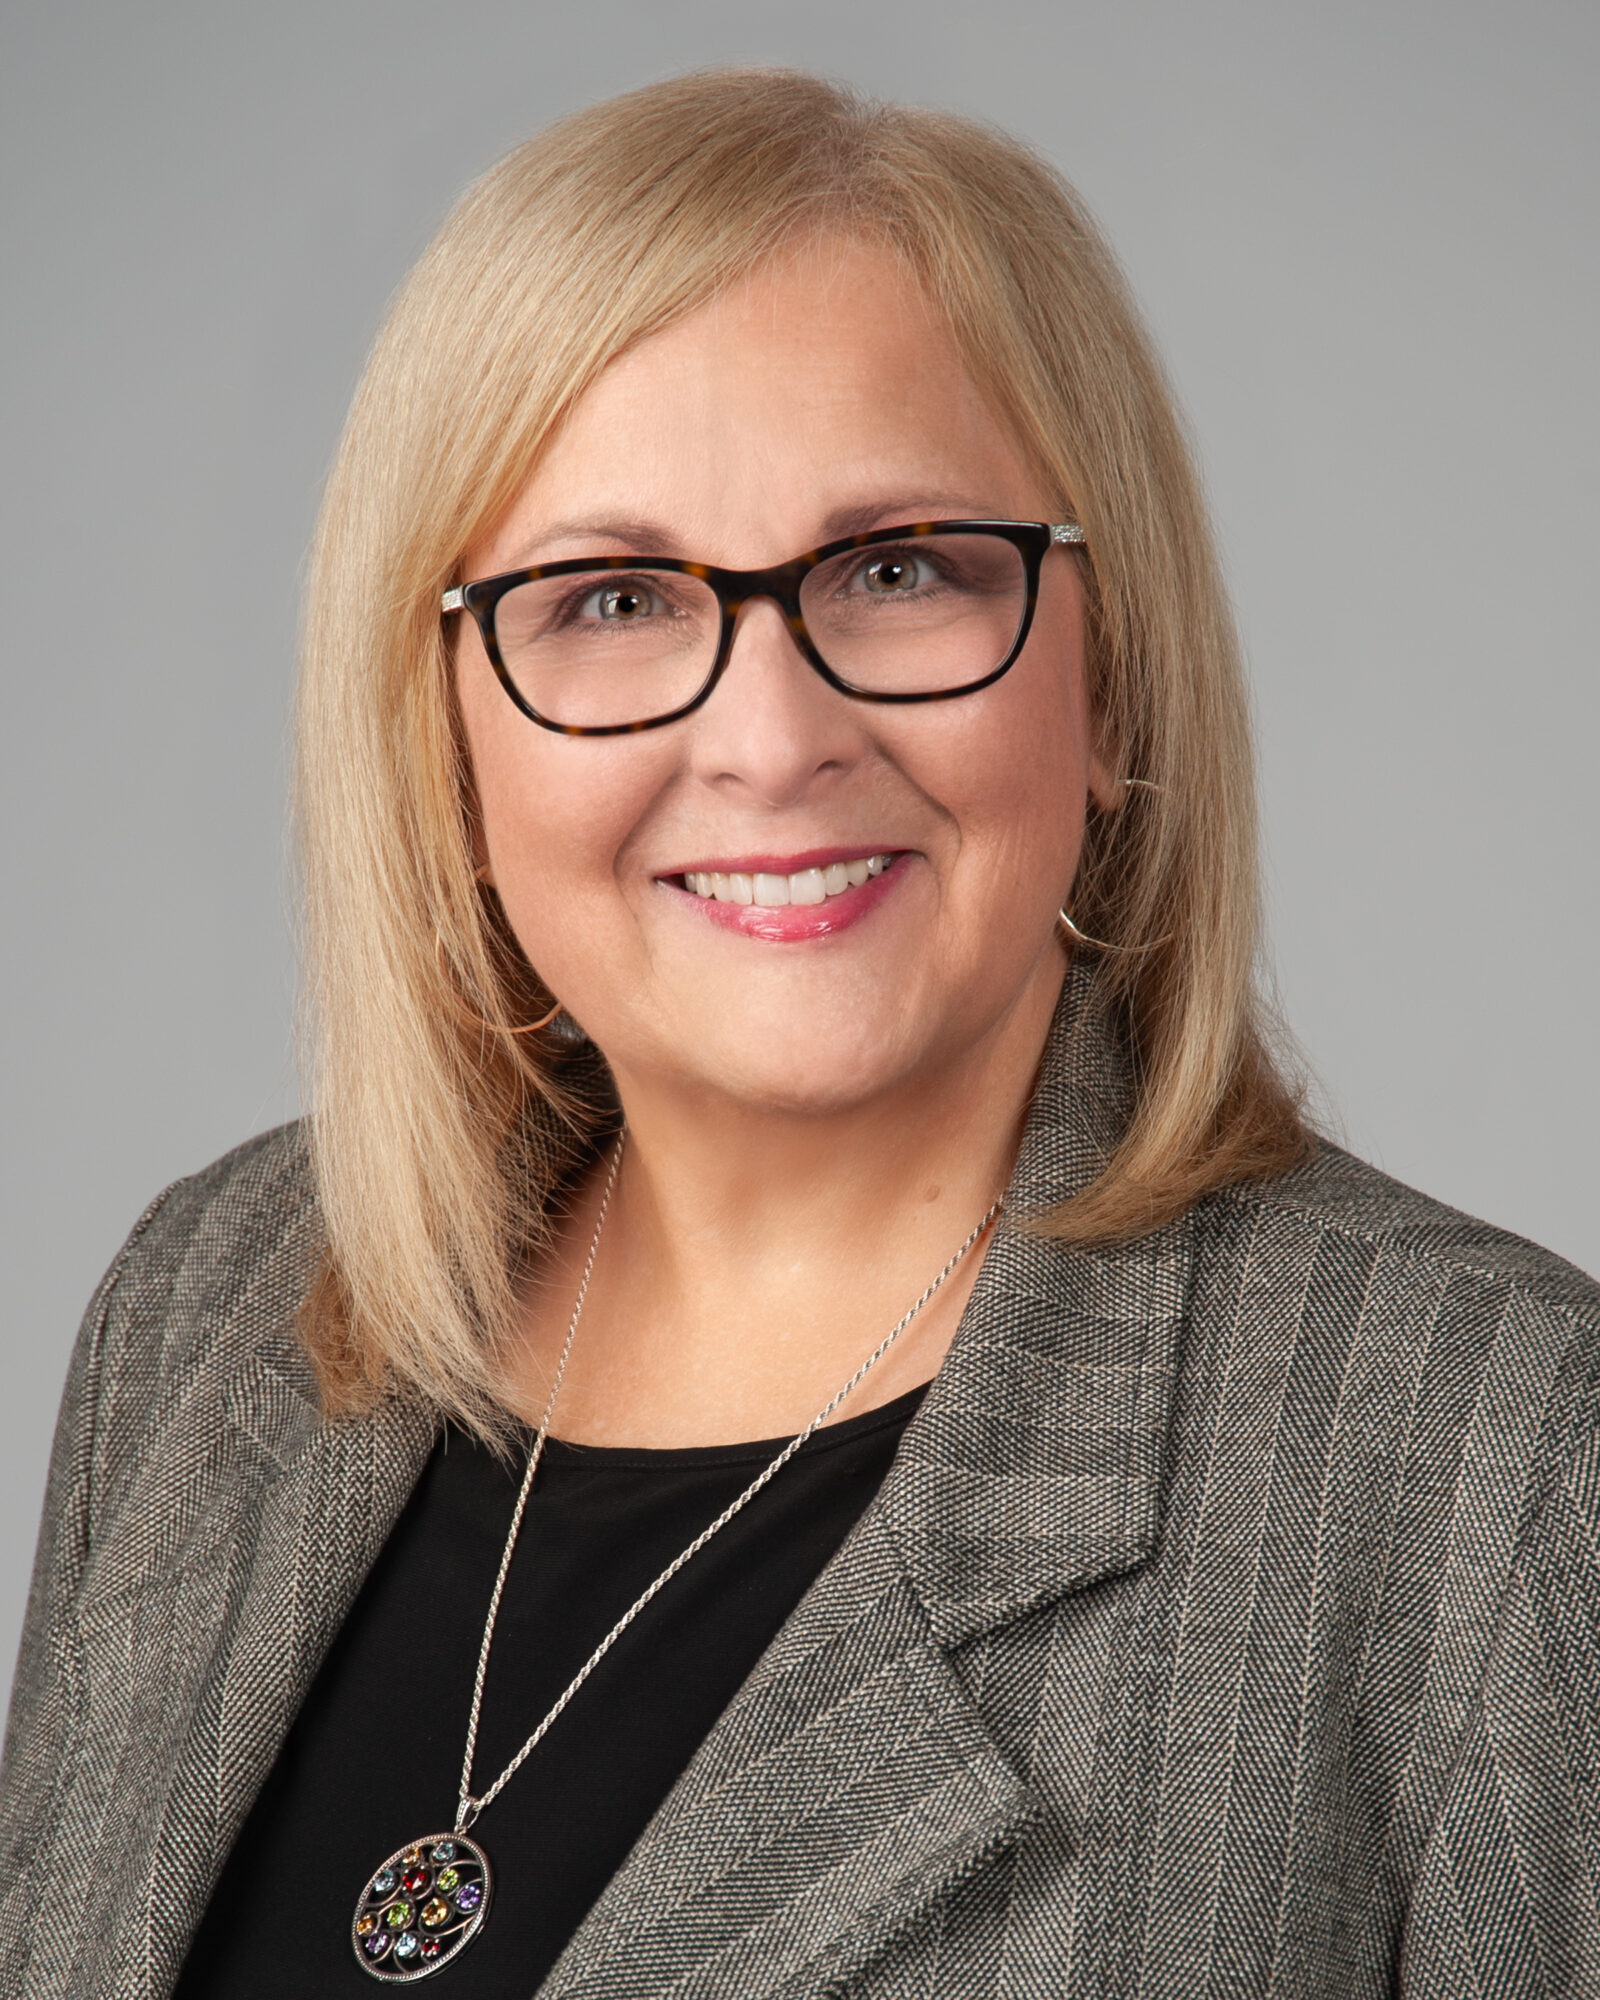 Kathy Brindley Promoted to Director of Finance